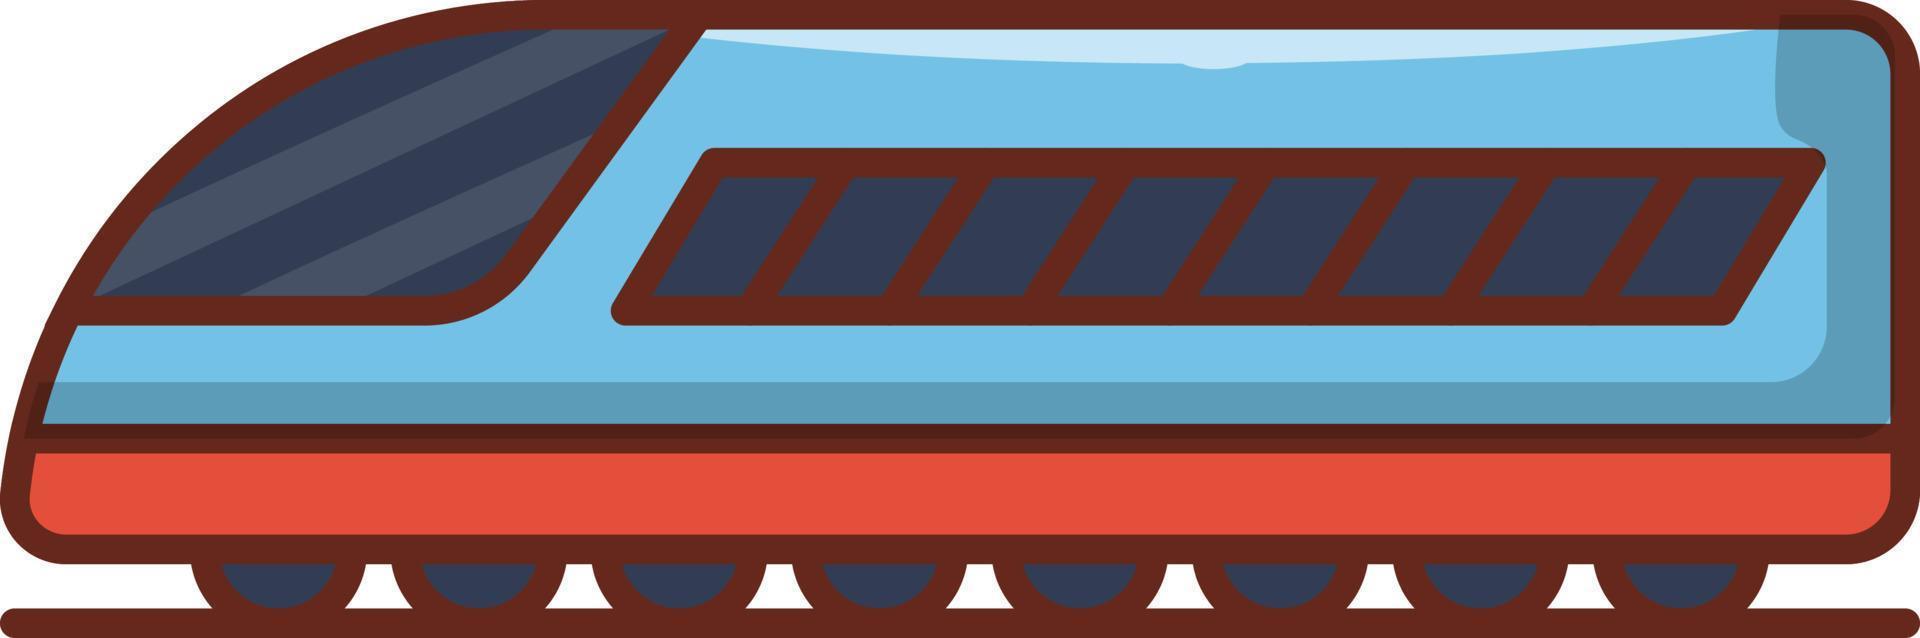 train vector illustration on a background.Premium quality symbols.vector icons for concept and graphic design.